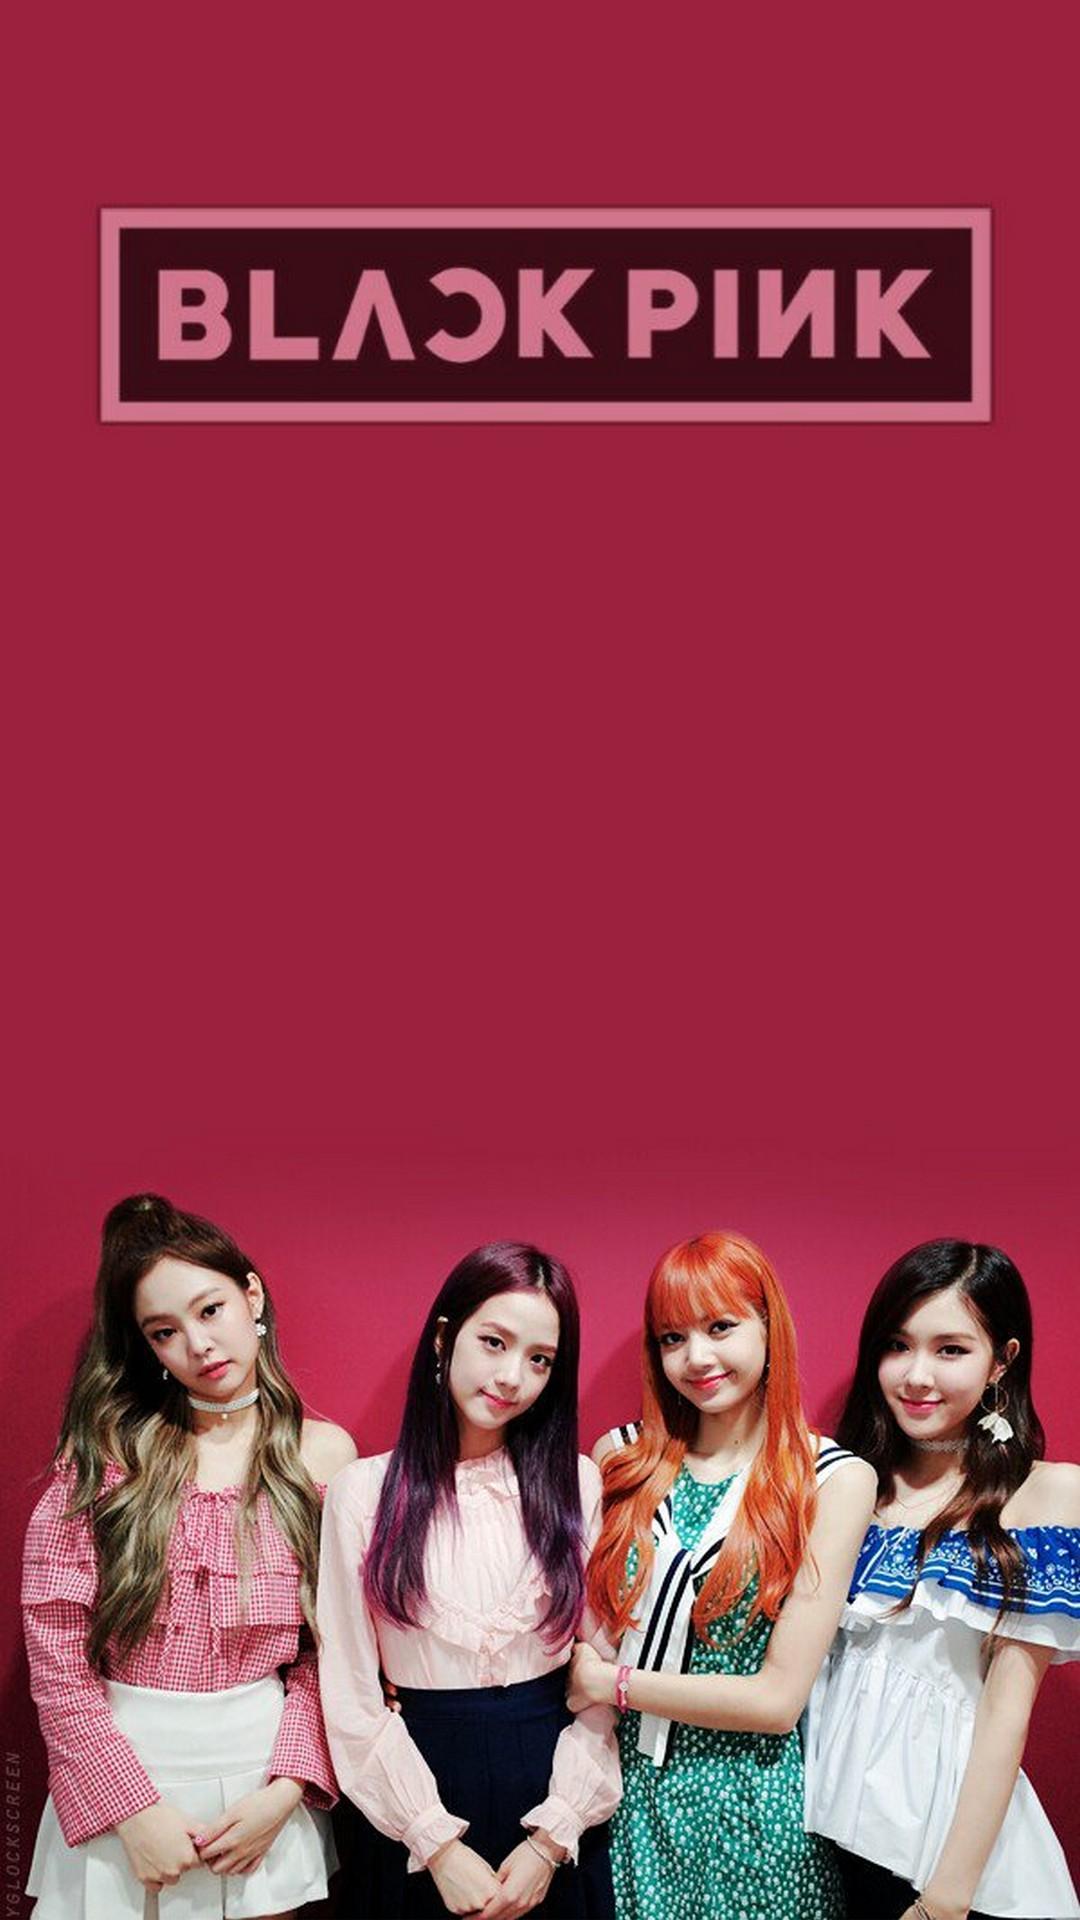 1080 x 1920 · jpeg - Android Wallpaper Blackpink - 2021 Android Wallpapers